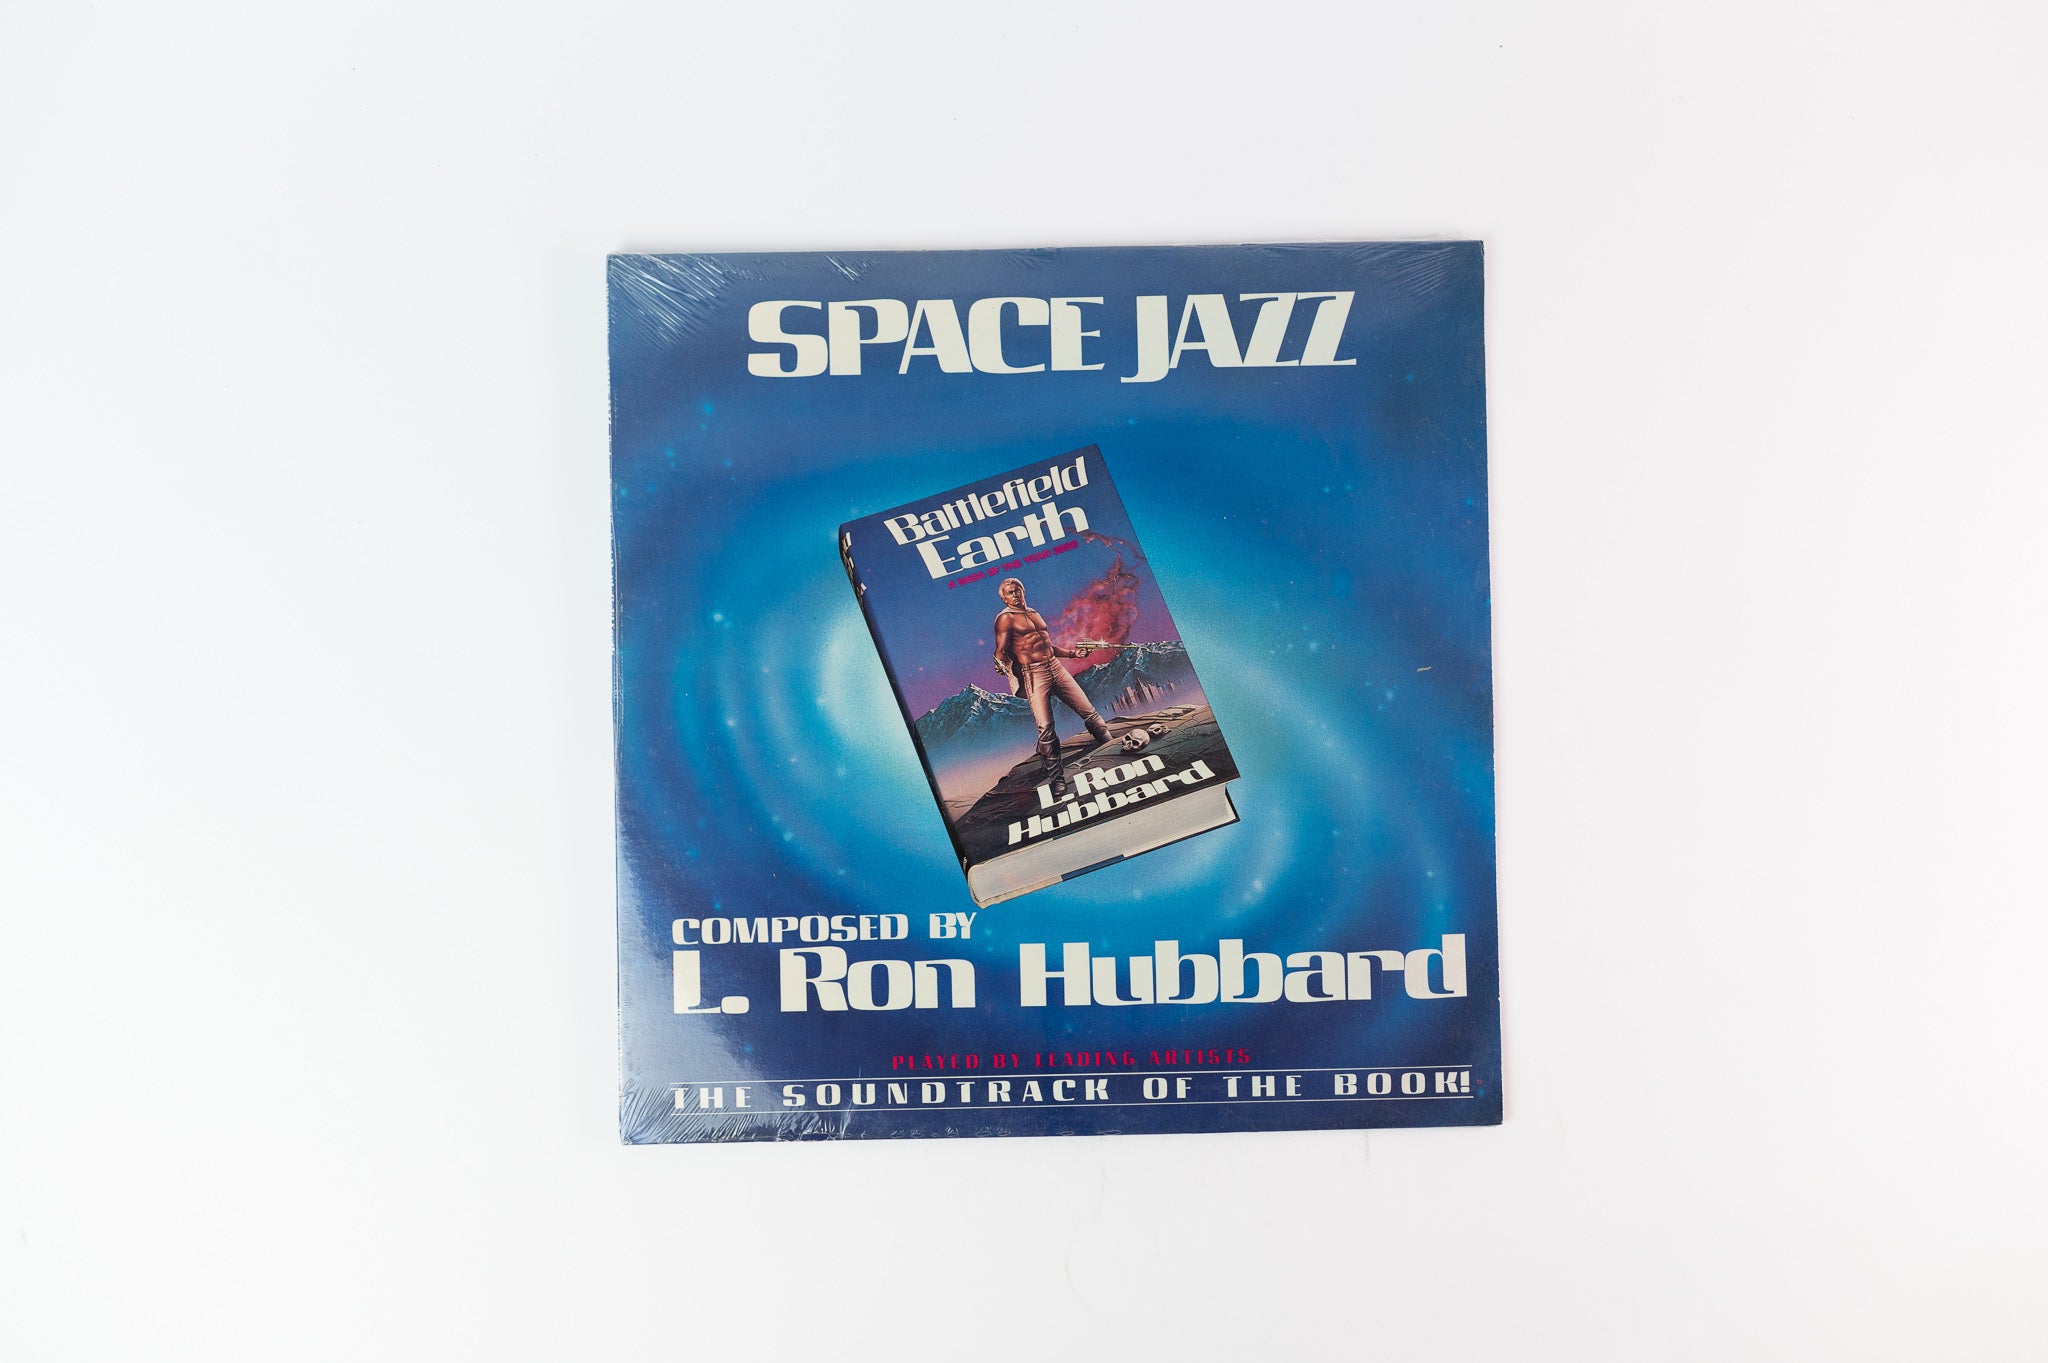 L. Ron Hubbard - Space Jazz on Applause Sealed